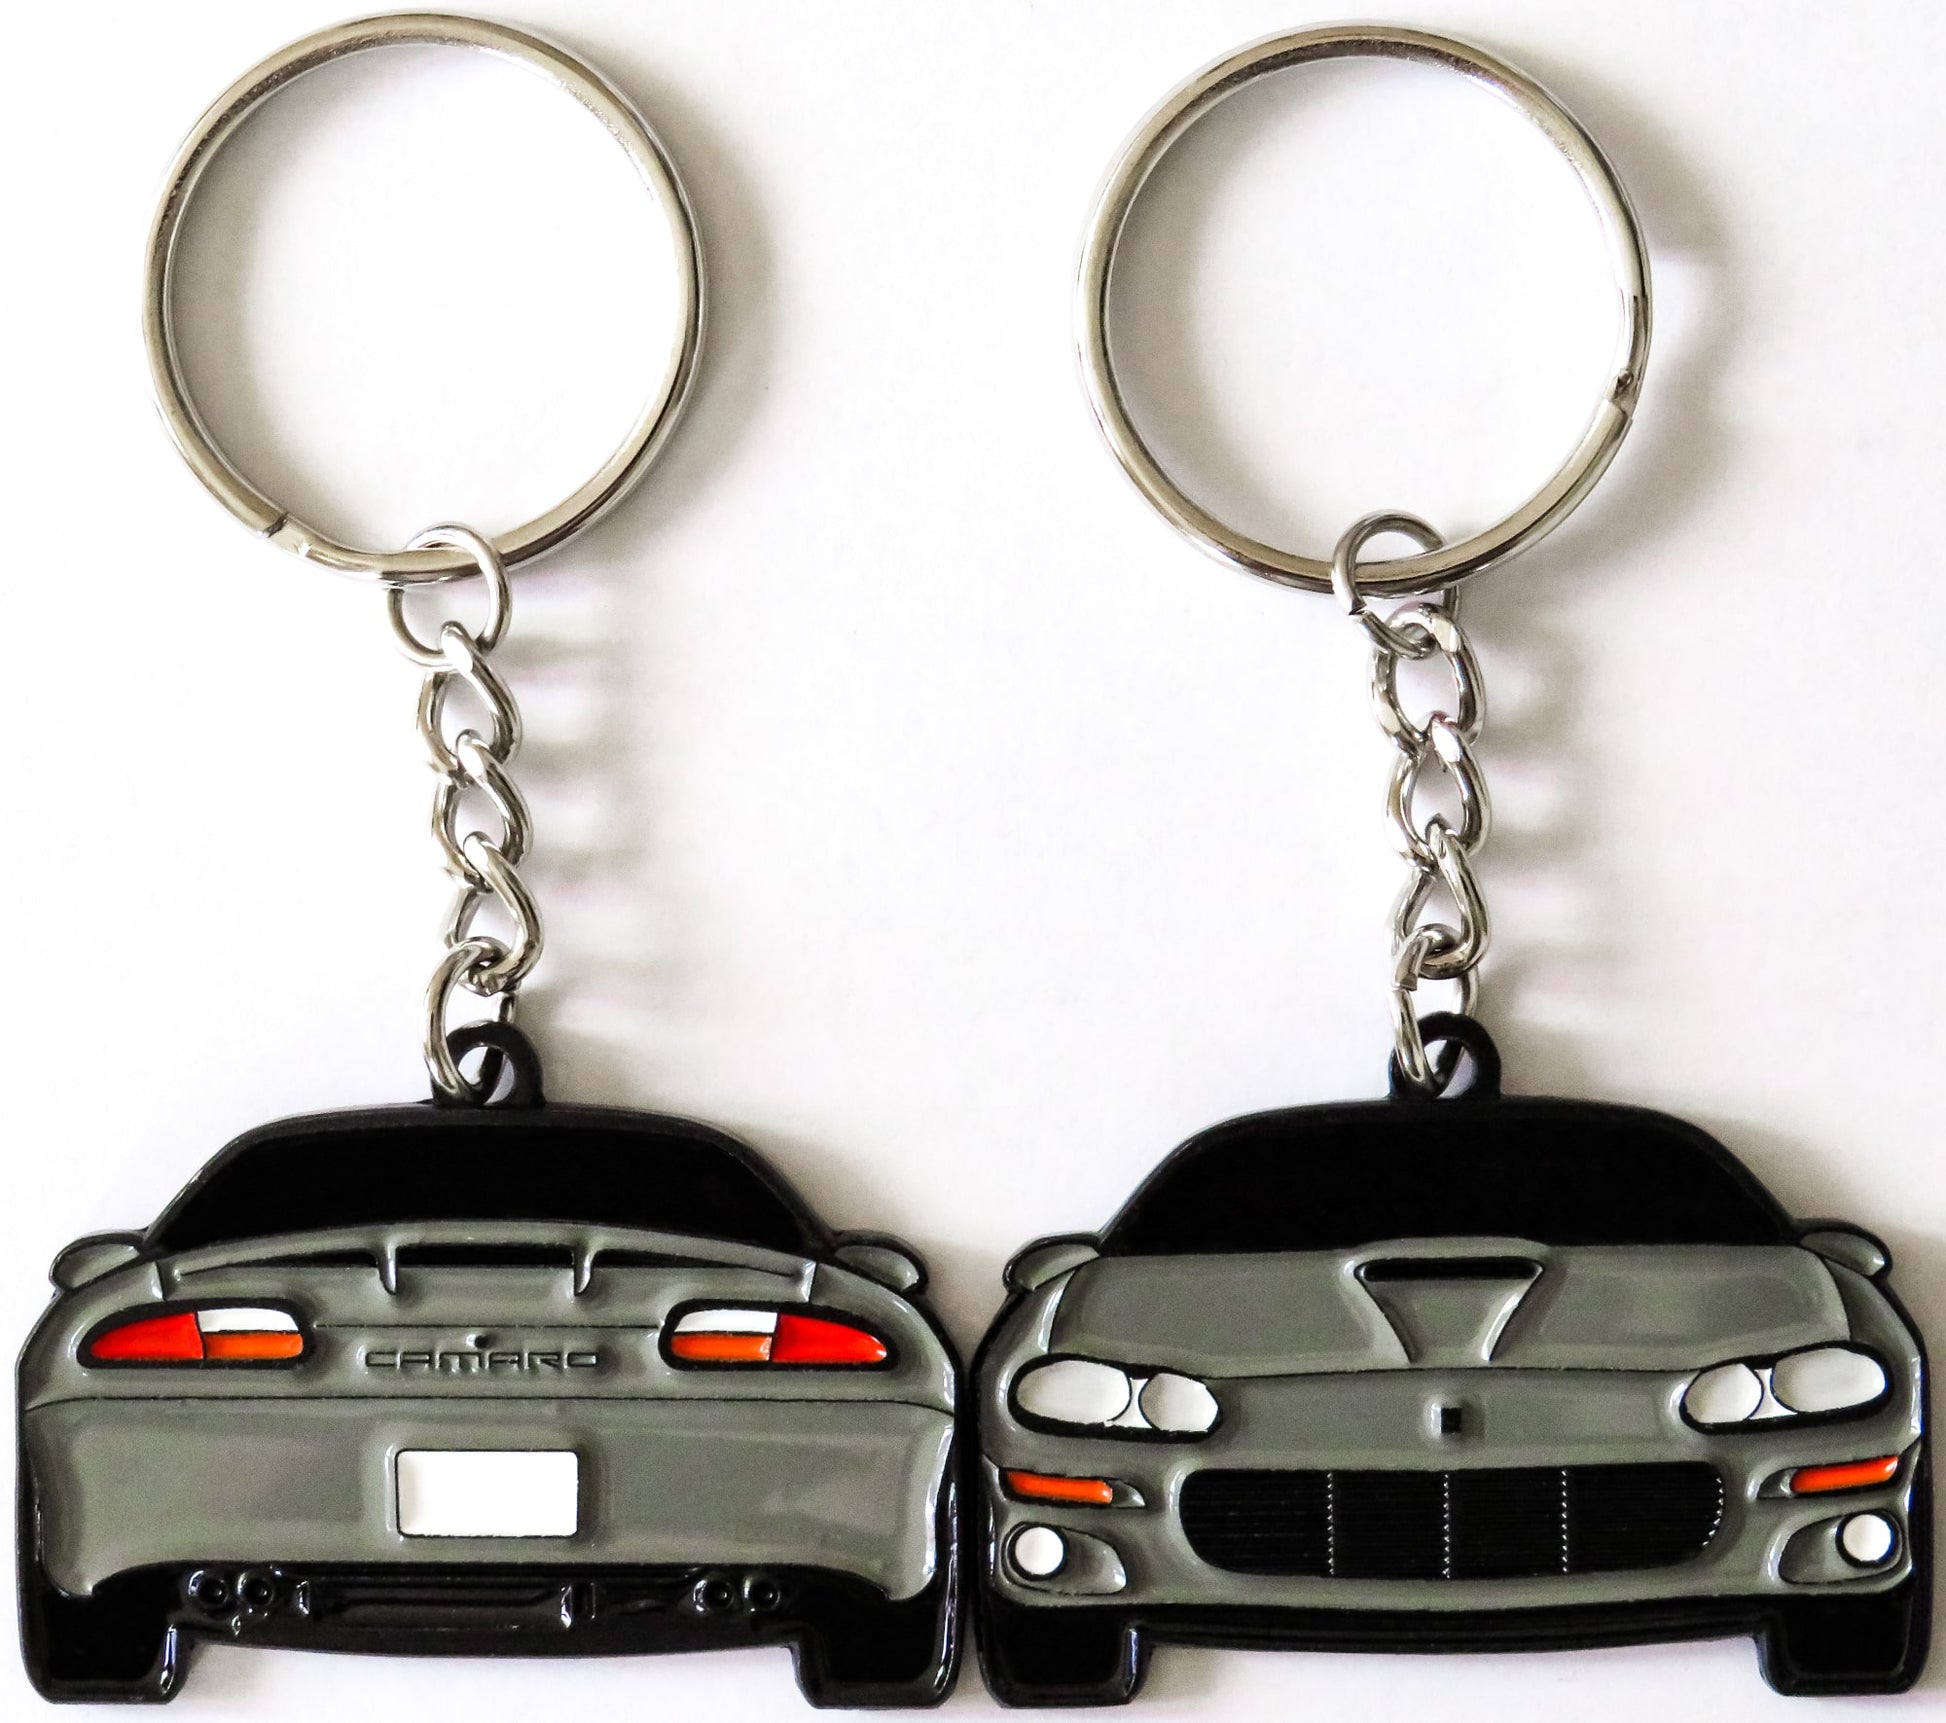 Enamel Keychain Pin Patch Lanyard that fits on a key fob For Chevy Camaro SS RS ZL1 1LE, Z28, and Z/28 4TH Generation 6th Gen American muscle car accessories, jet tag, key ring gift ideas for car guys, car enthusiasts, gearheads, father, mother, dad, mom, him, her, boyfriend, girlfriend and more. The ultimate keychain for Catfish Camaro owners fans and enthusiasts